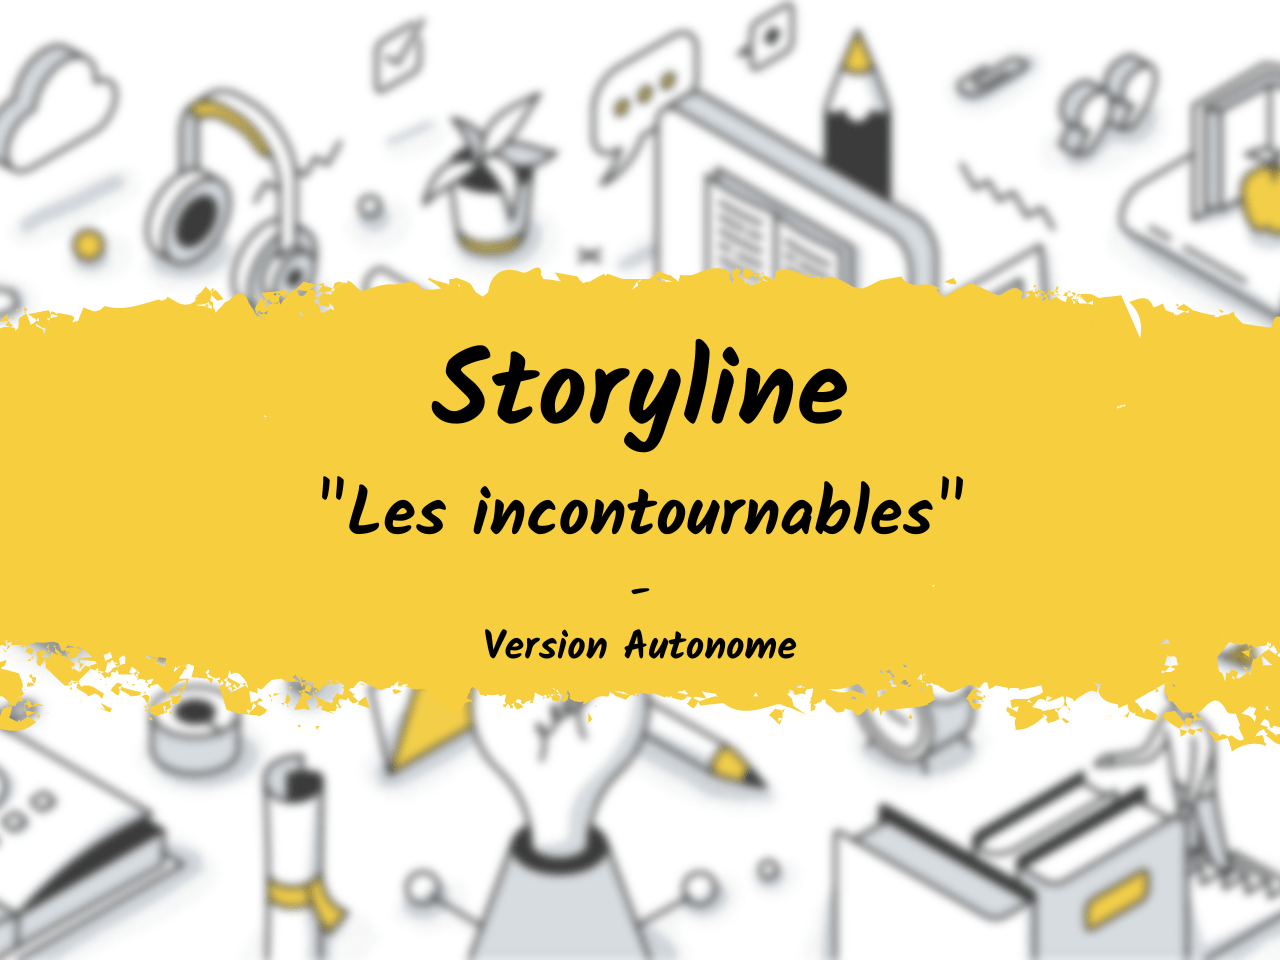 Formation pour apprendre Articulate Storyline - Elearning Impact.